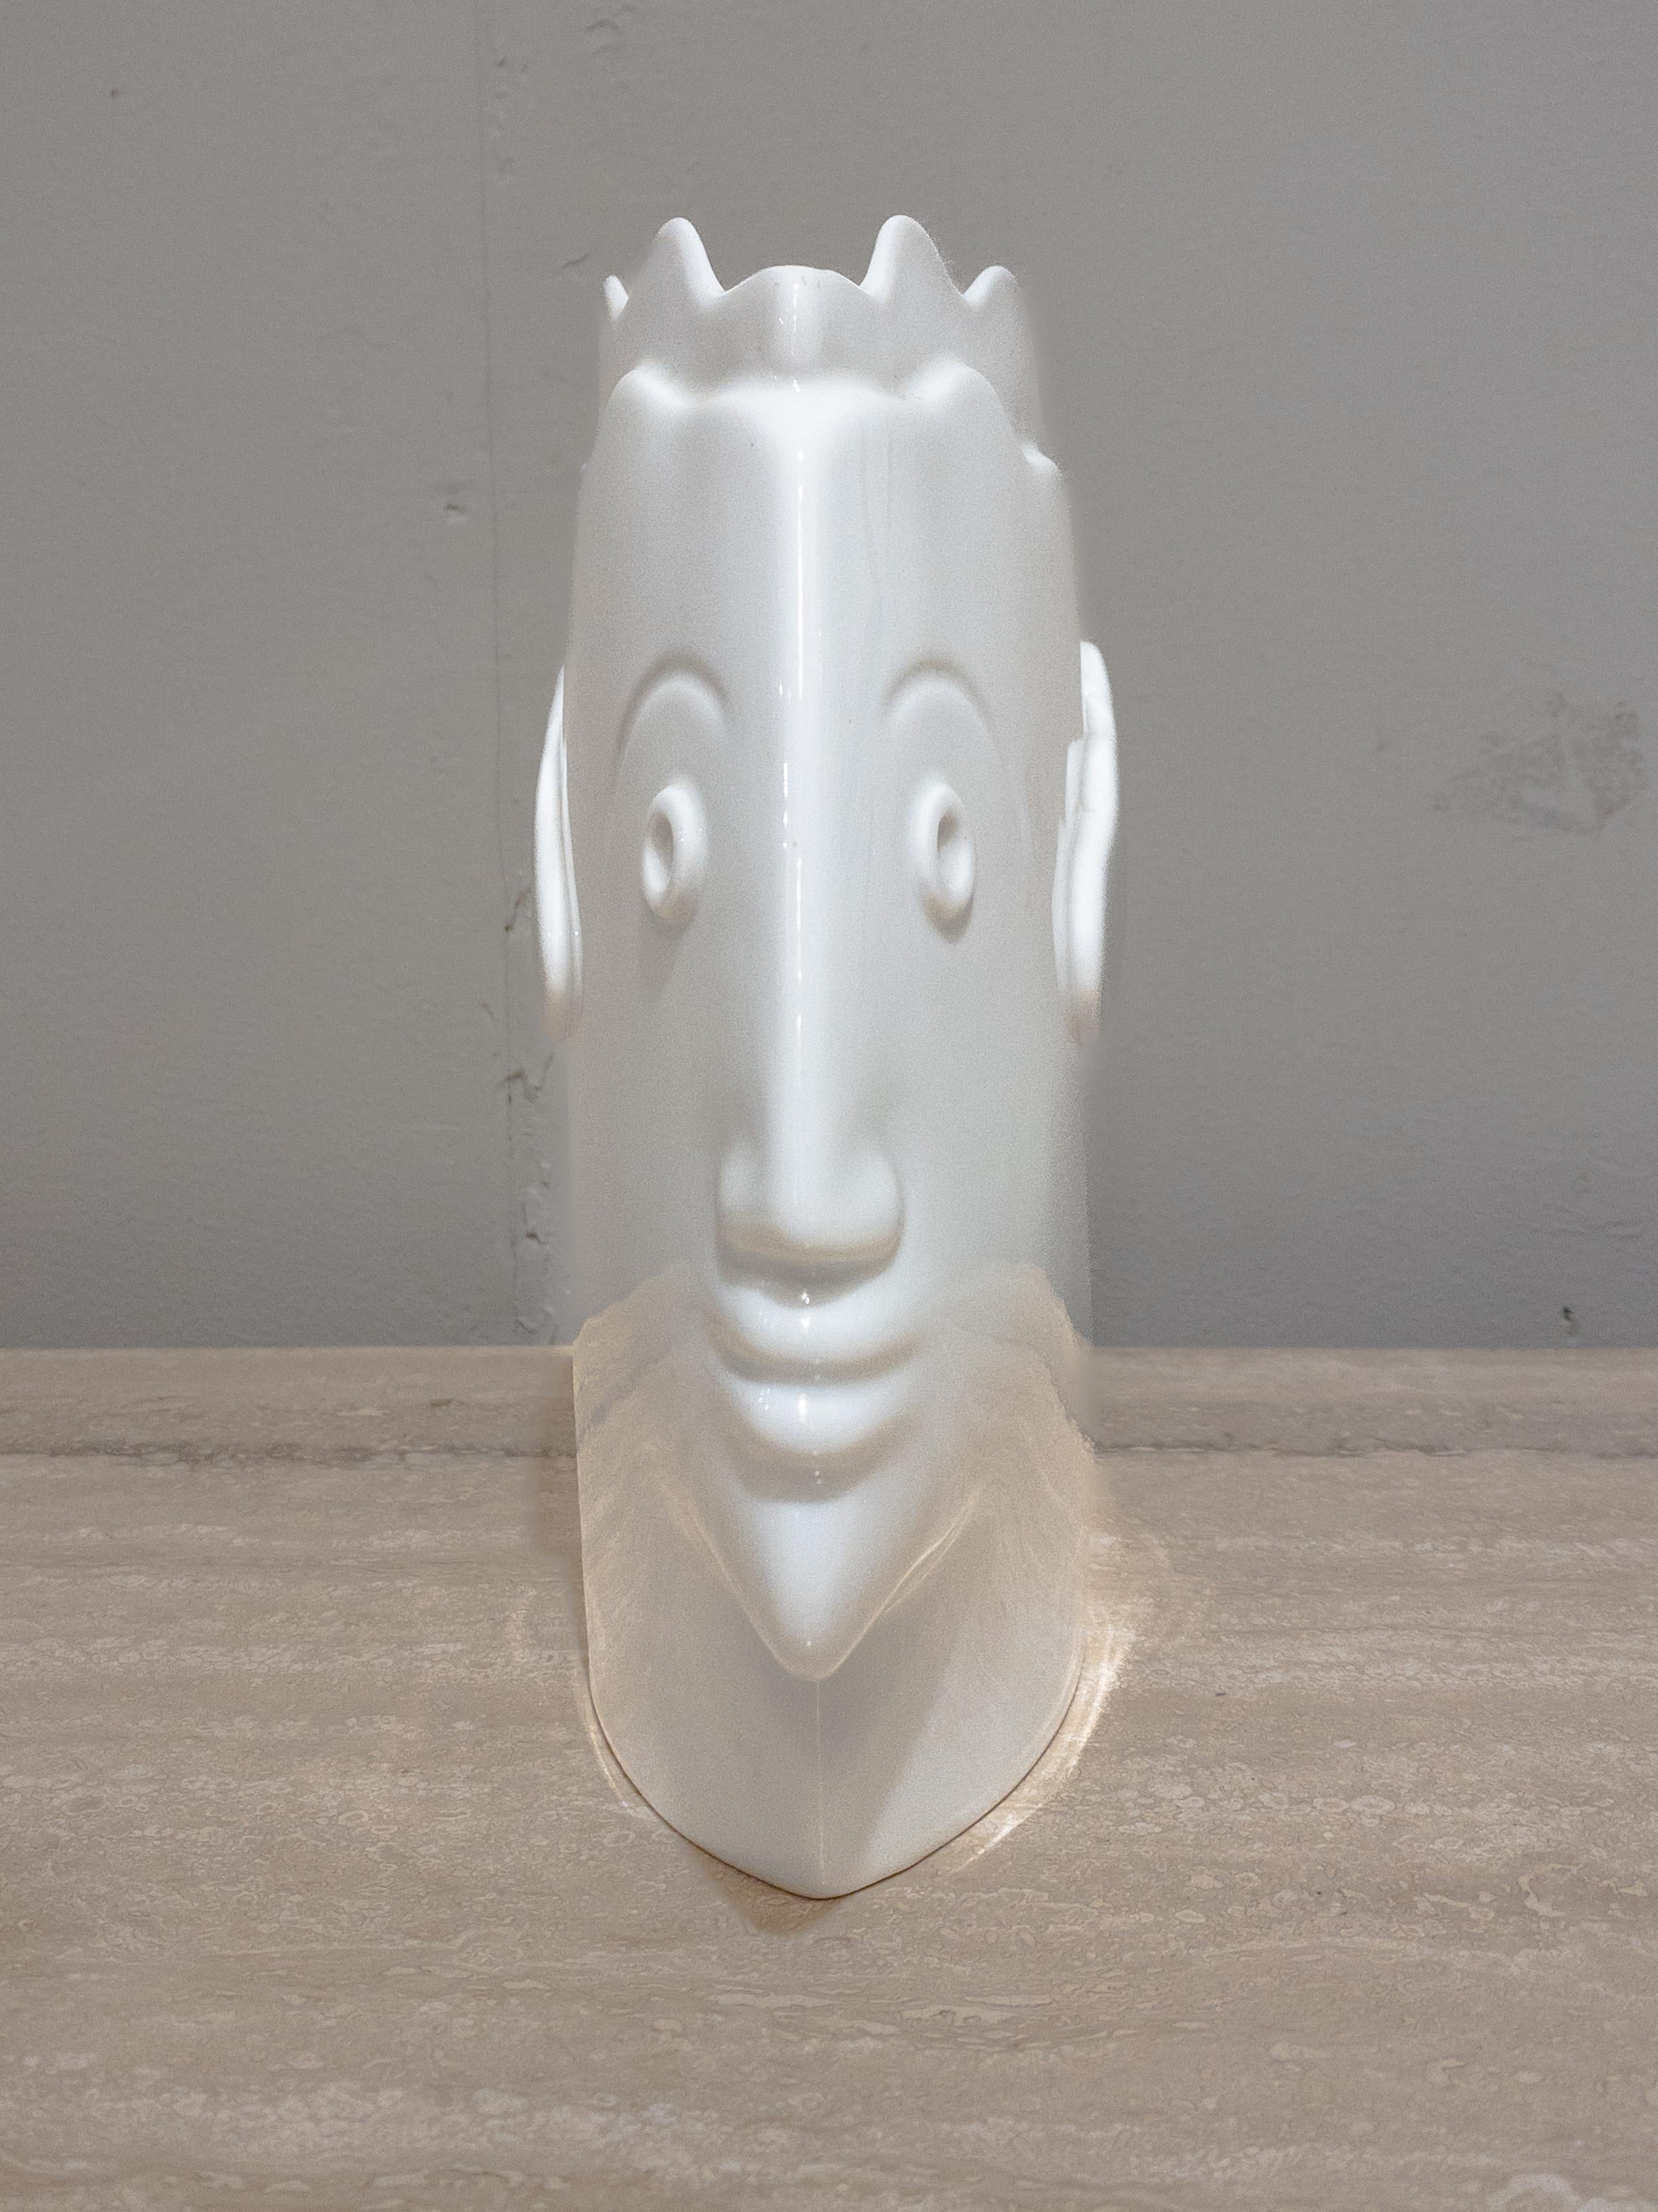 1980s Post modern ceramic vase by noted Austrian artist Heide Warlamis (b.1942) from her renowned Vienna Collection. Signed on the bottom along with the maker's mark.